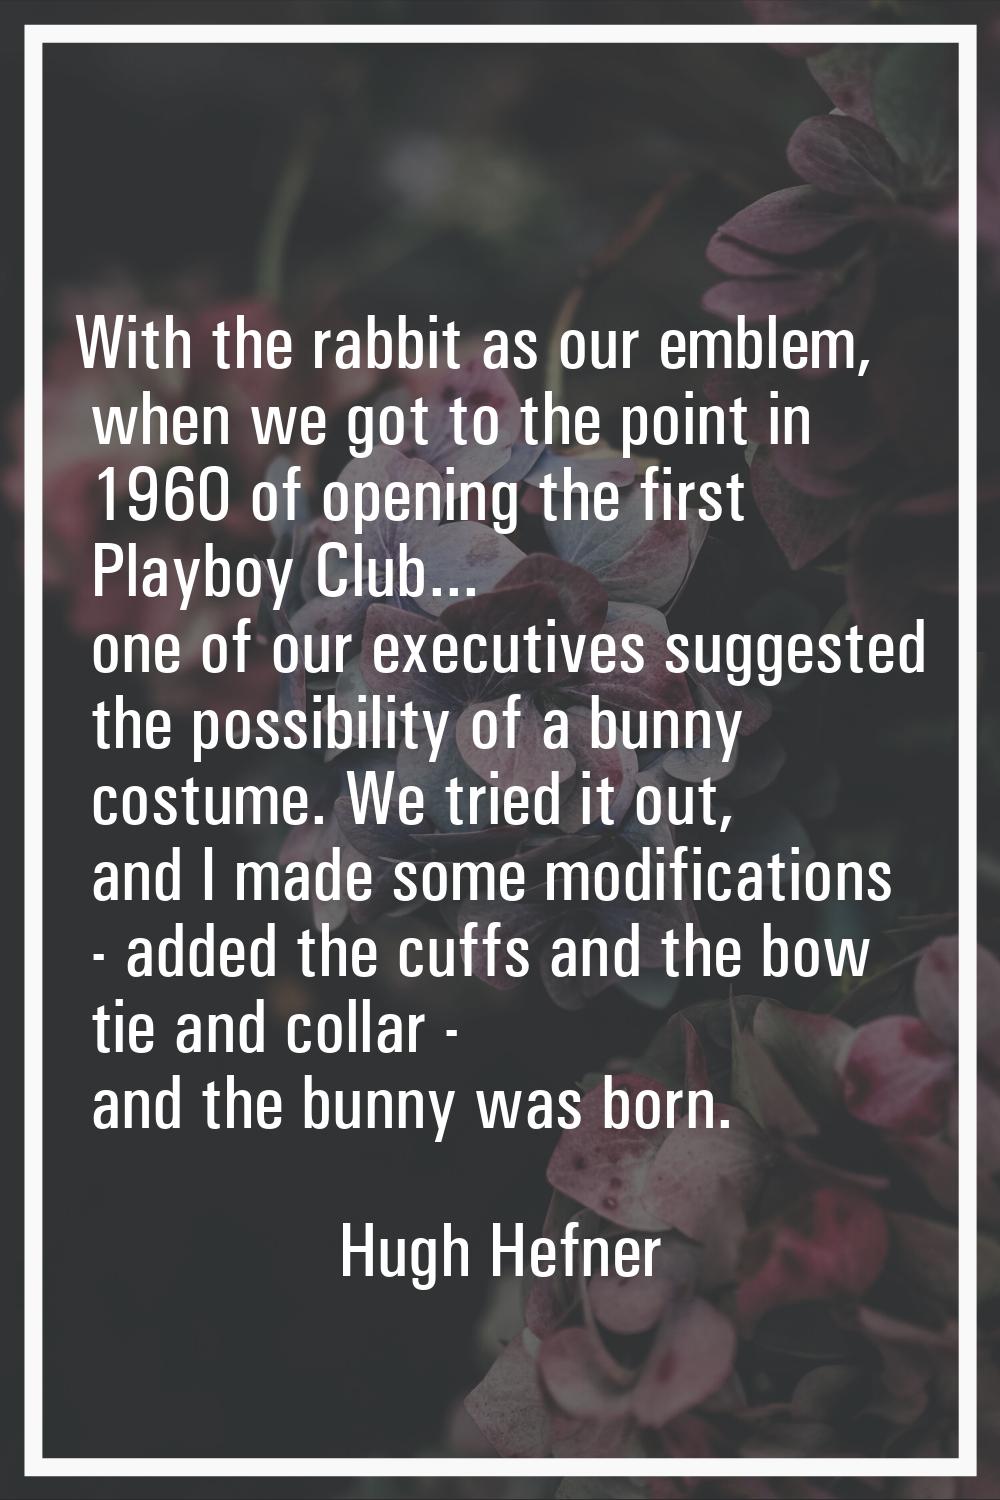 With the rabbit as our emblem, when we got to the point in 1960 of opening the first Playboy Club..